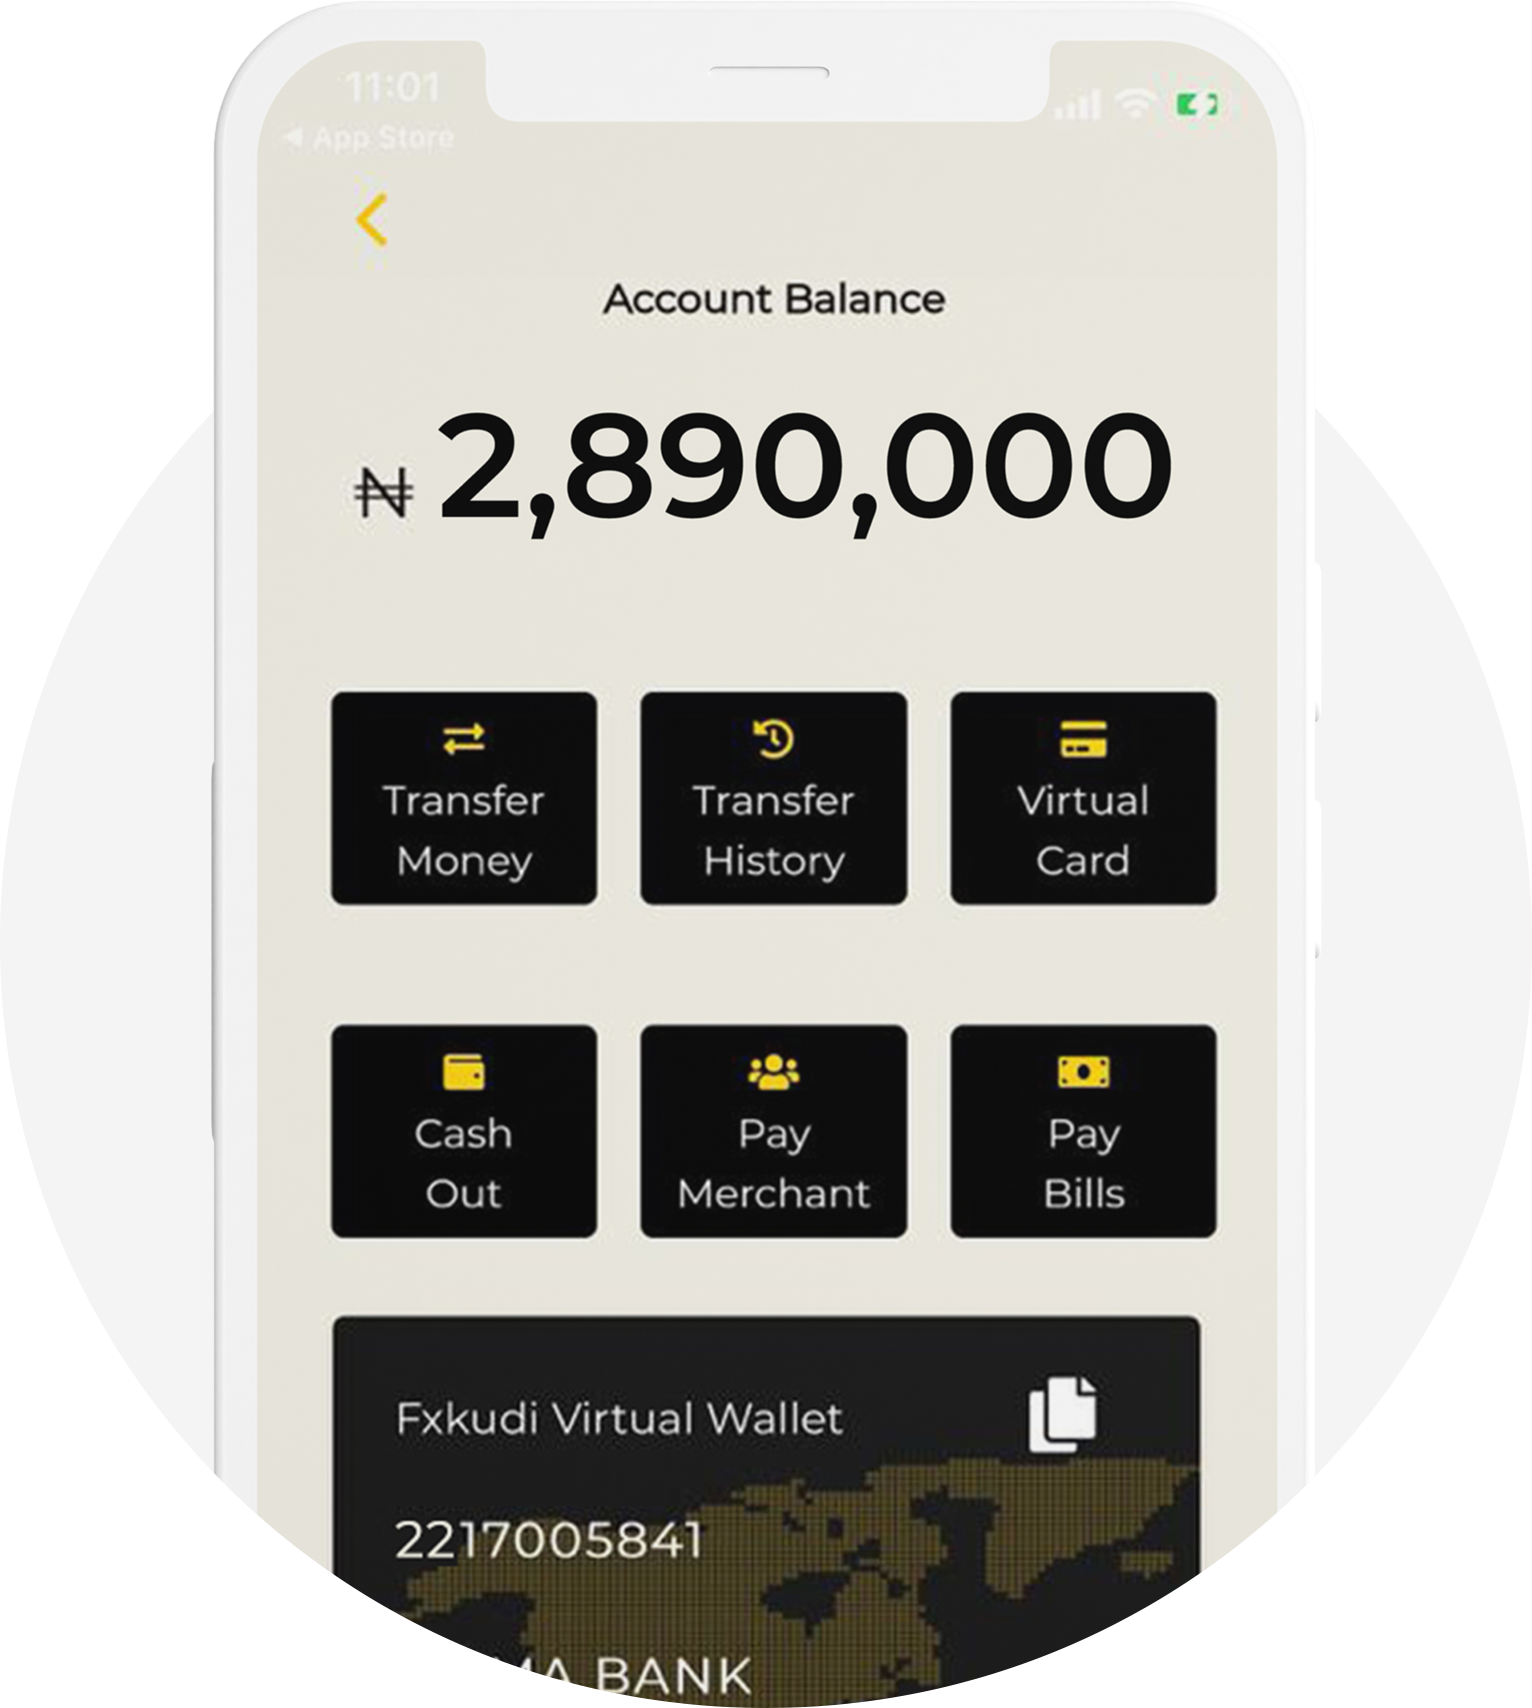 virtual wallet to buy airtime and pay bills